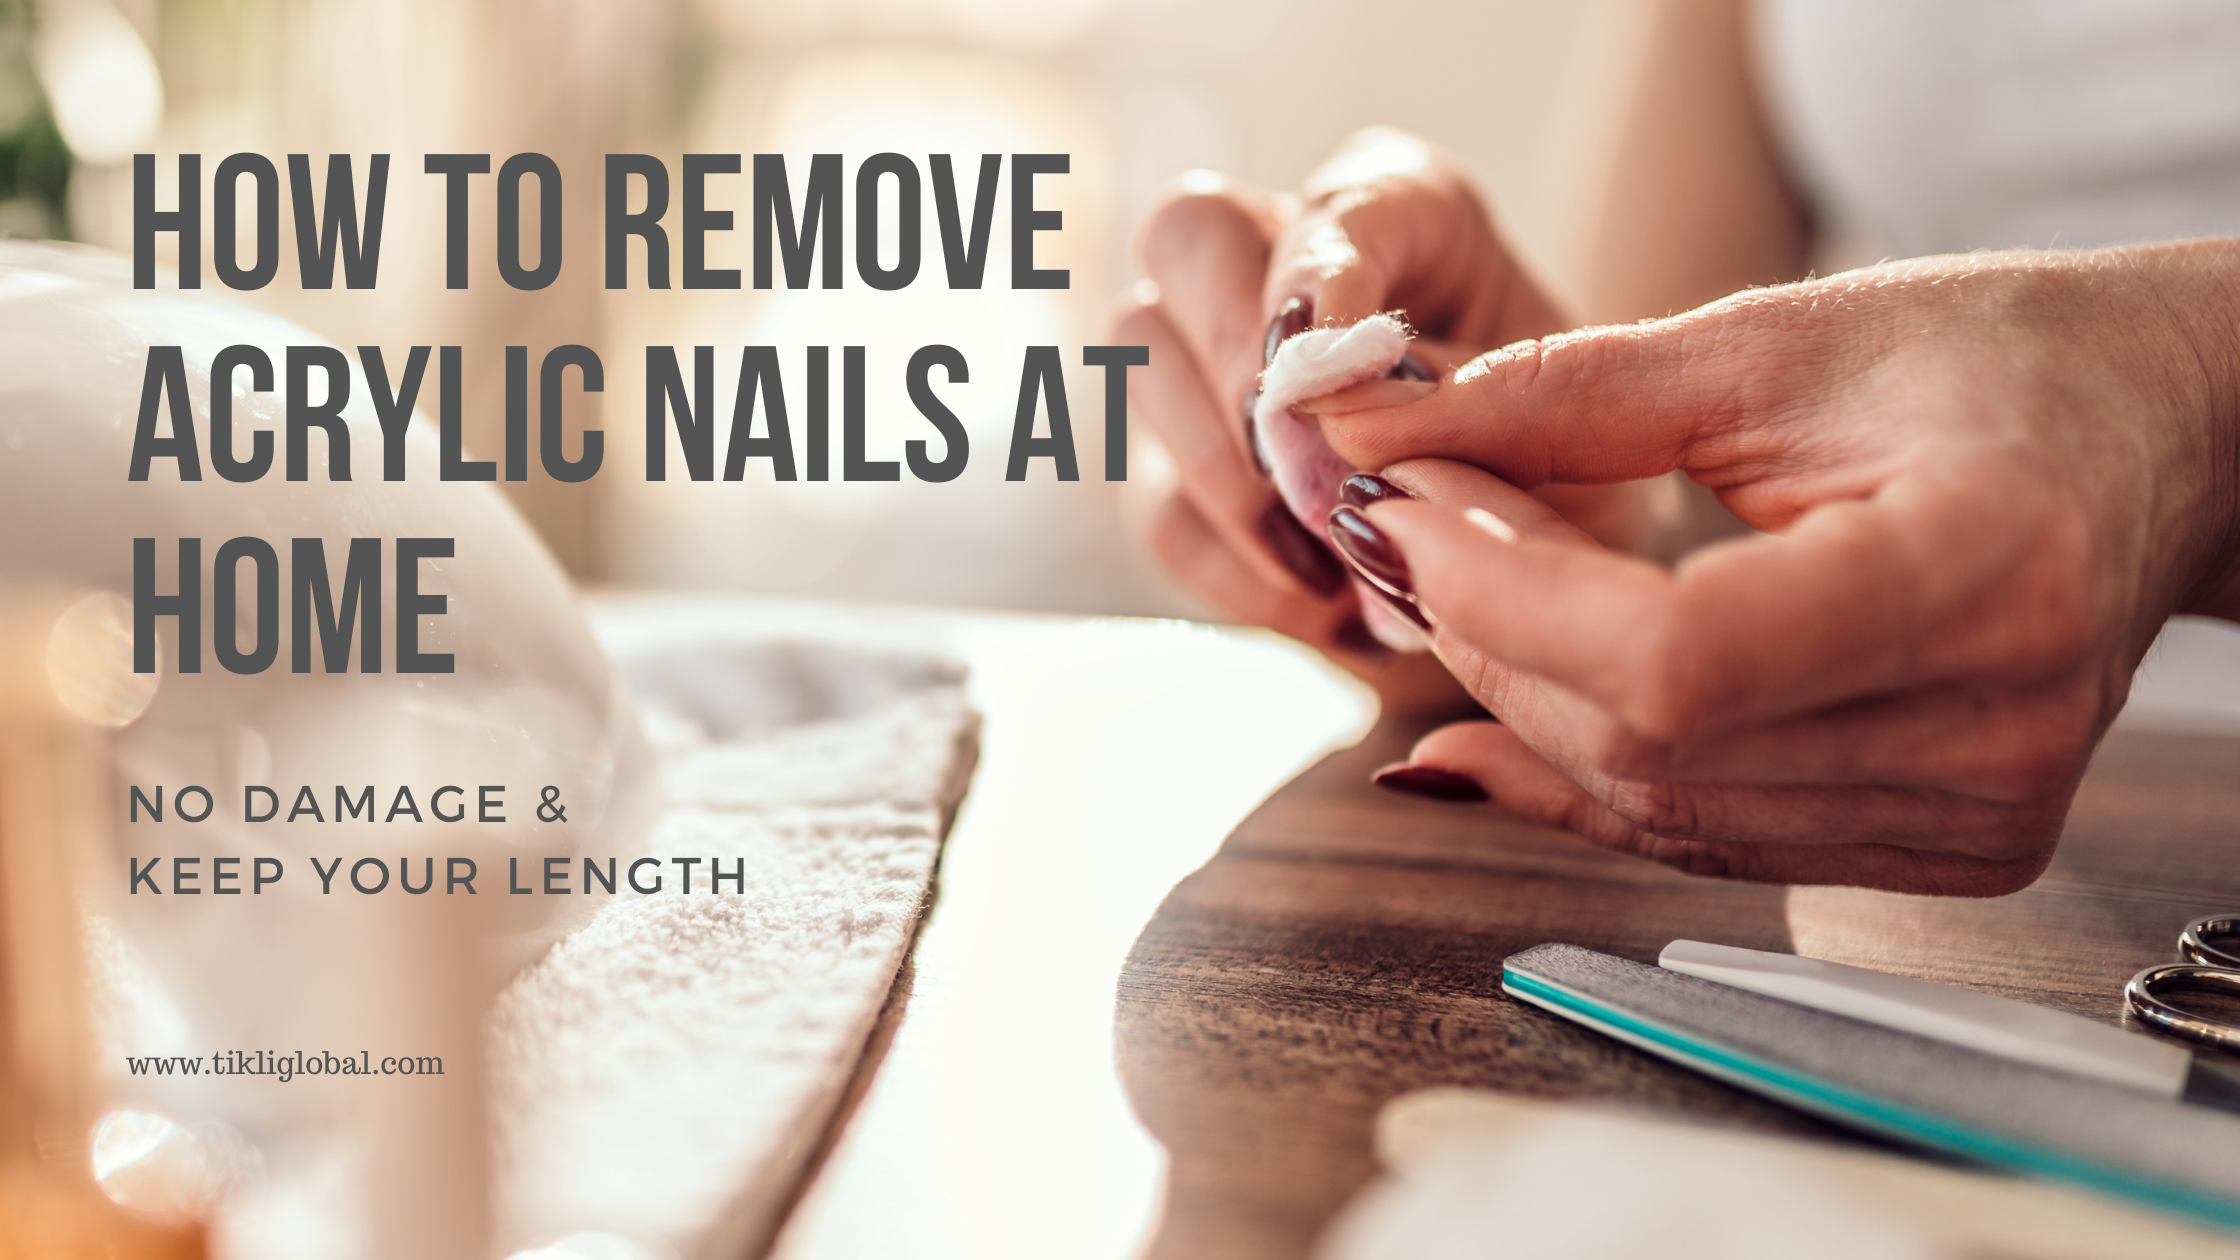 How To Remove Acrylic Nails at Home - Without Damage - Tikli